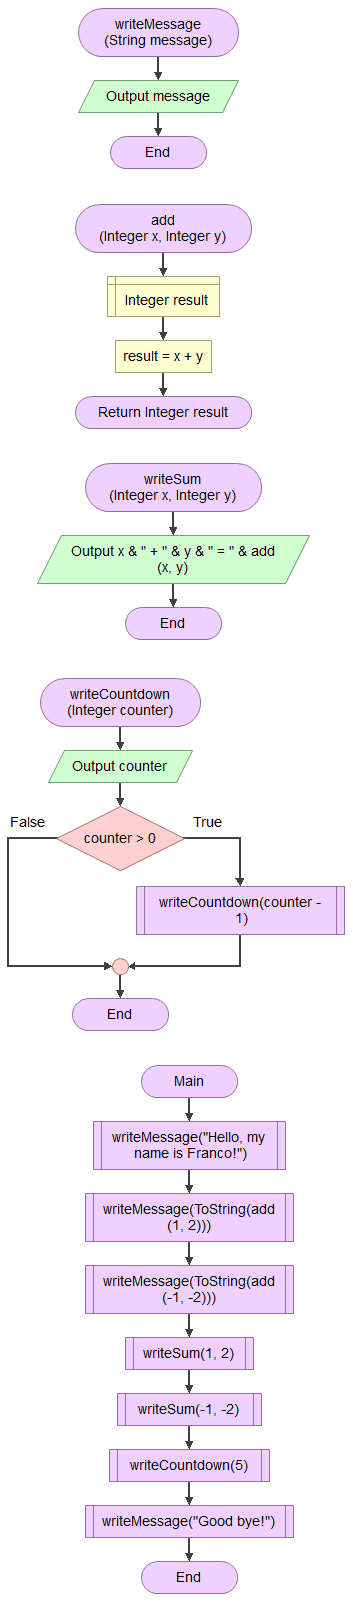 Example of using subroutines in Flowgorithm, using the English interface.